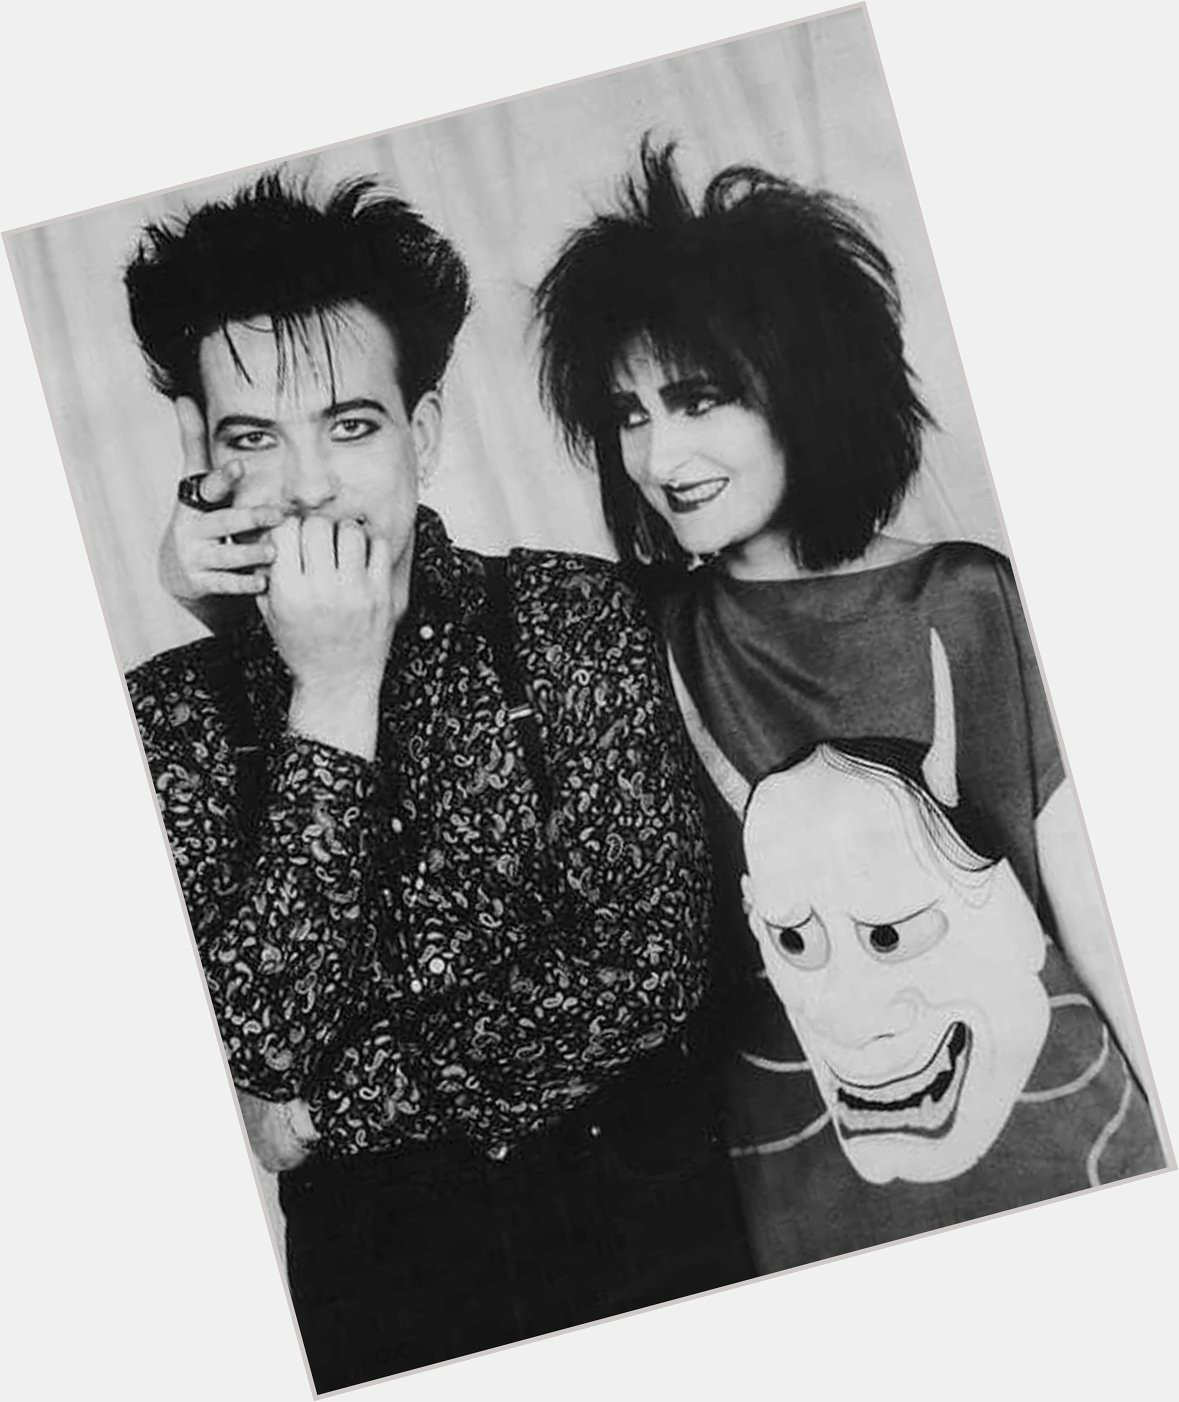 Happy birthday to Robert Smith for inspiring me and my band so much!              